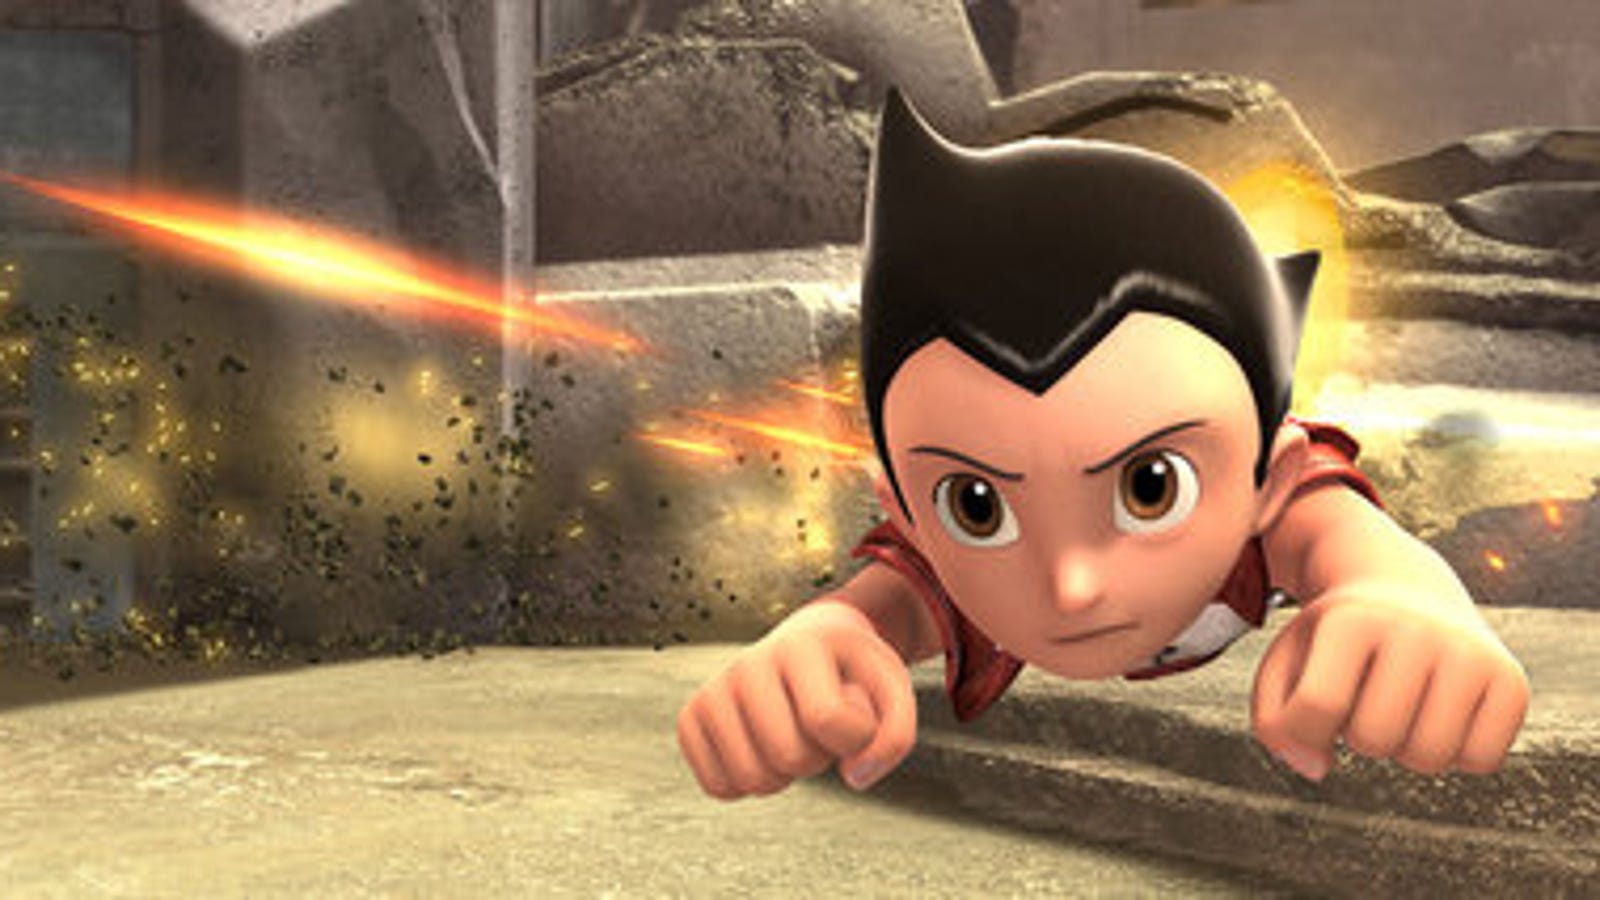 Astro Boy: Subversive, Awesome Flying-Robot Action